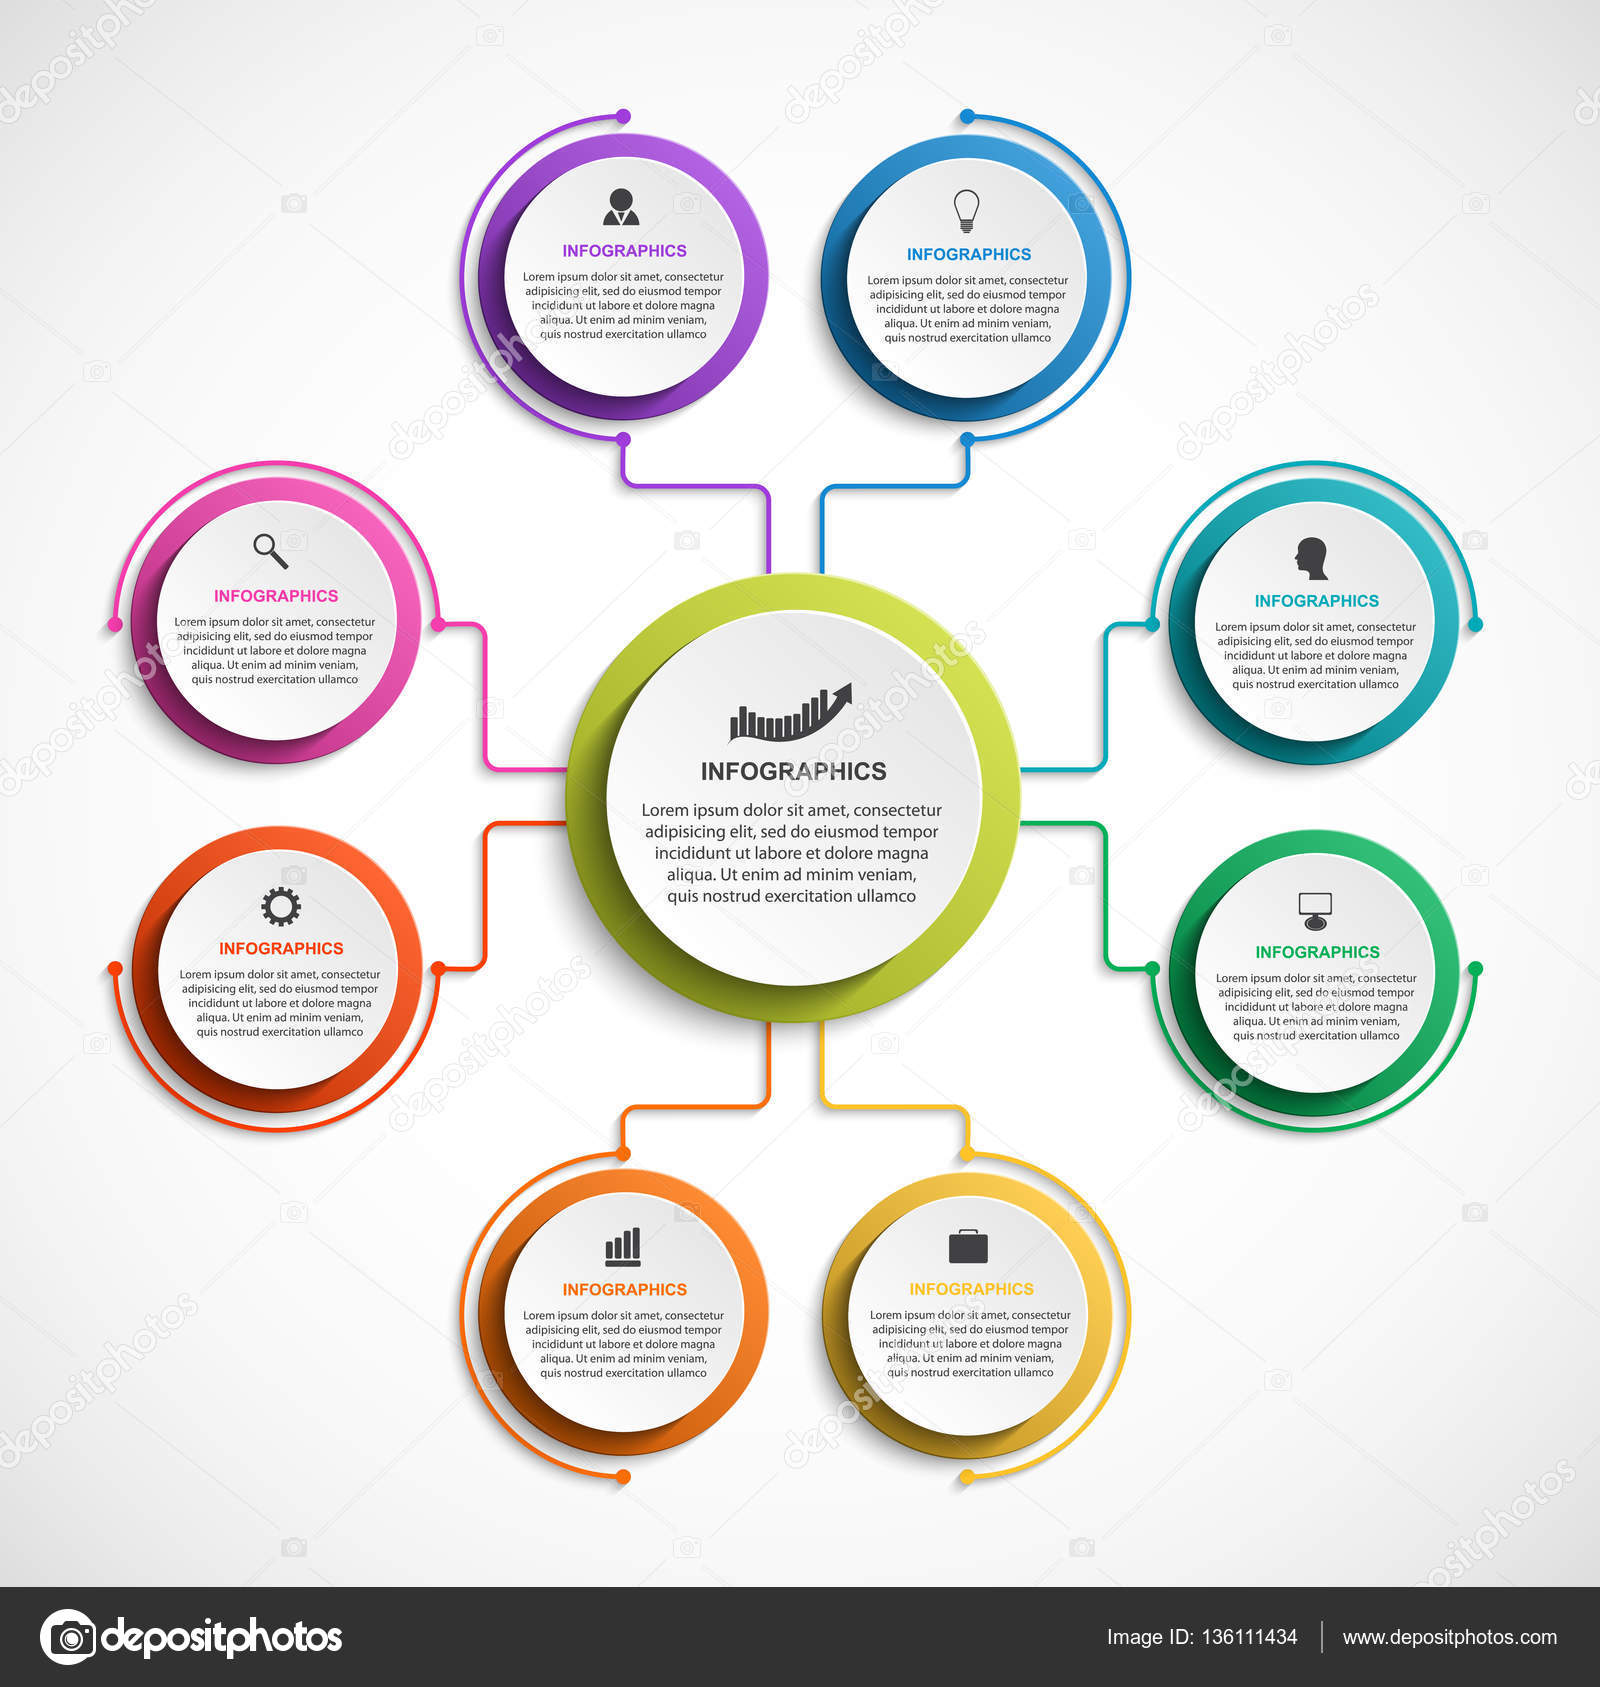 Infographic design organization chart template. Infographics for business presentations or ...